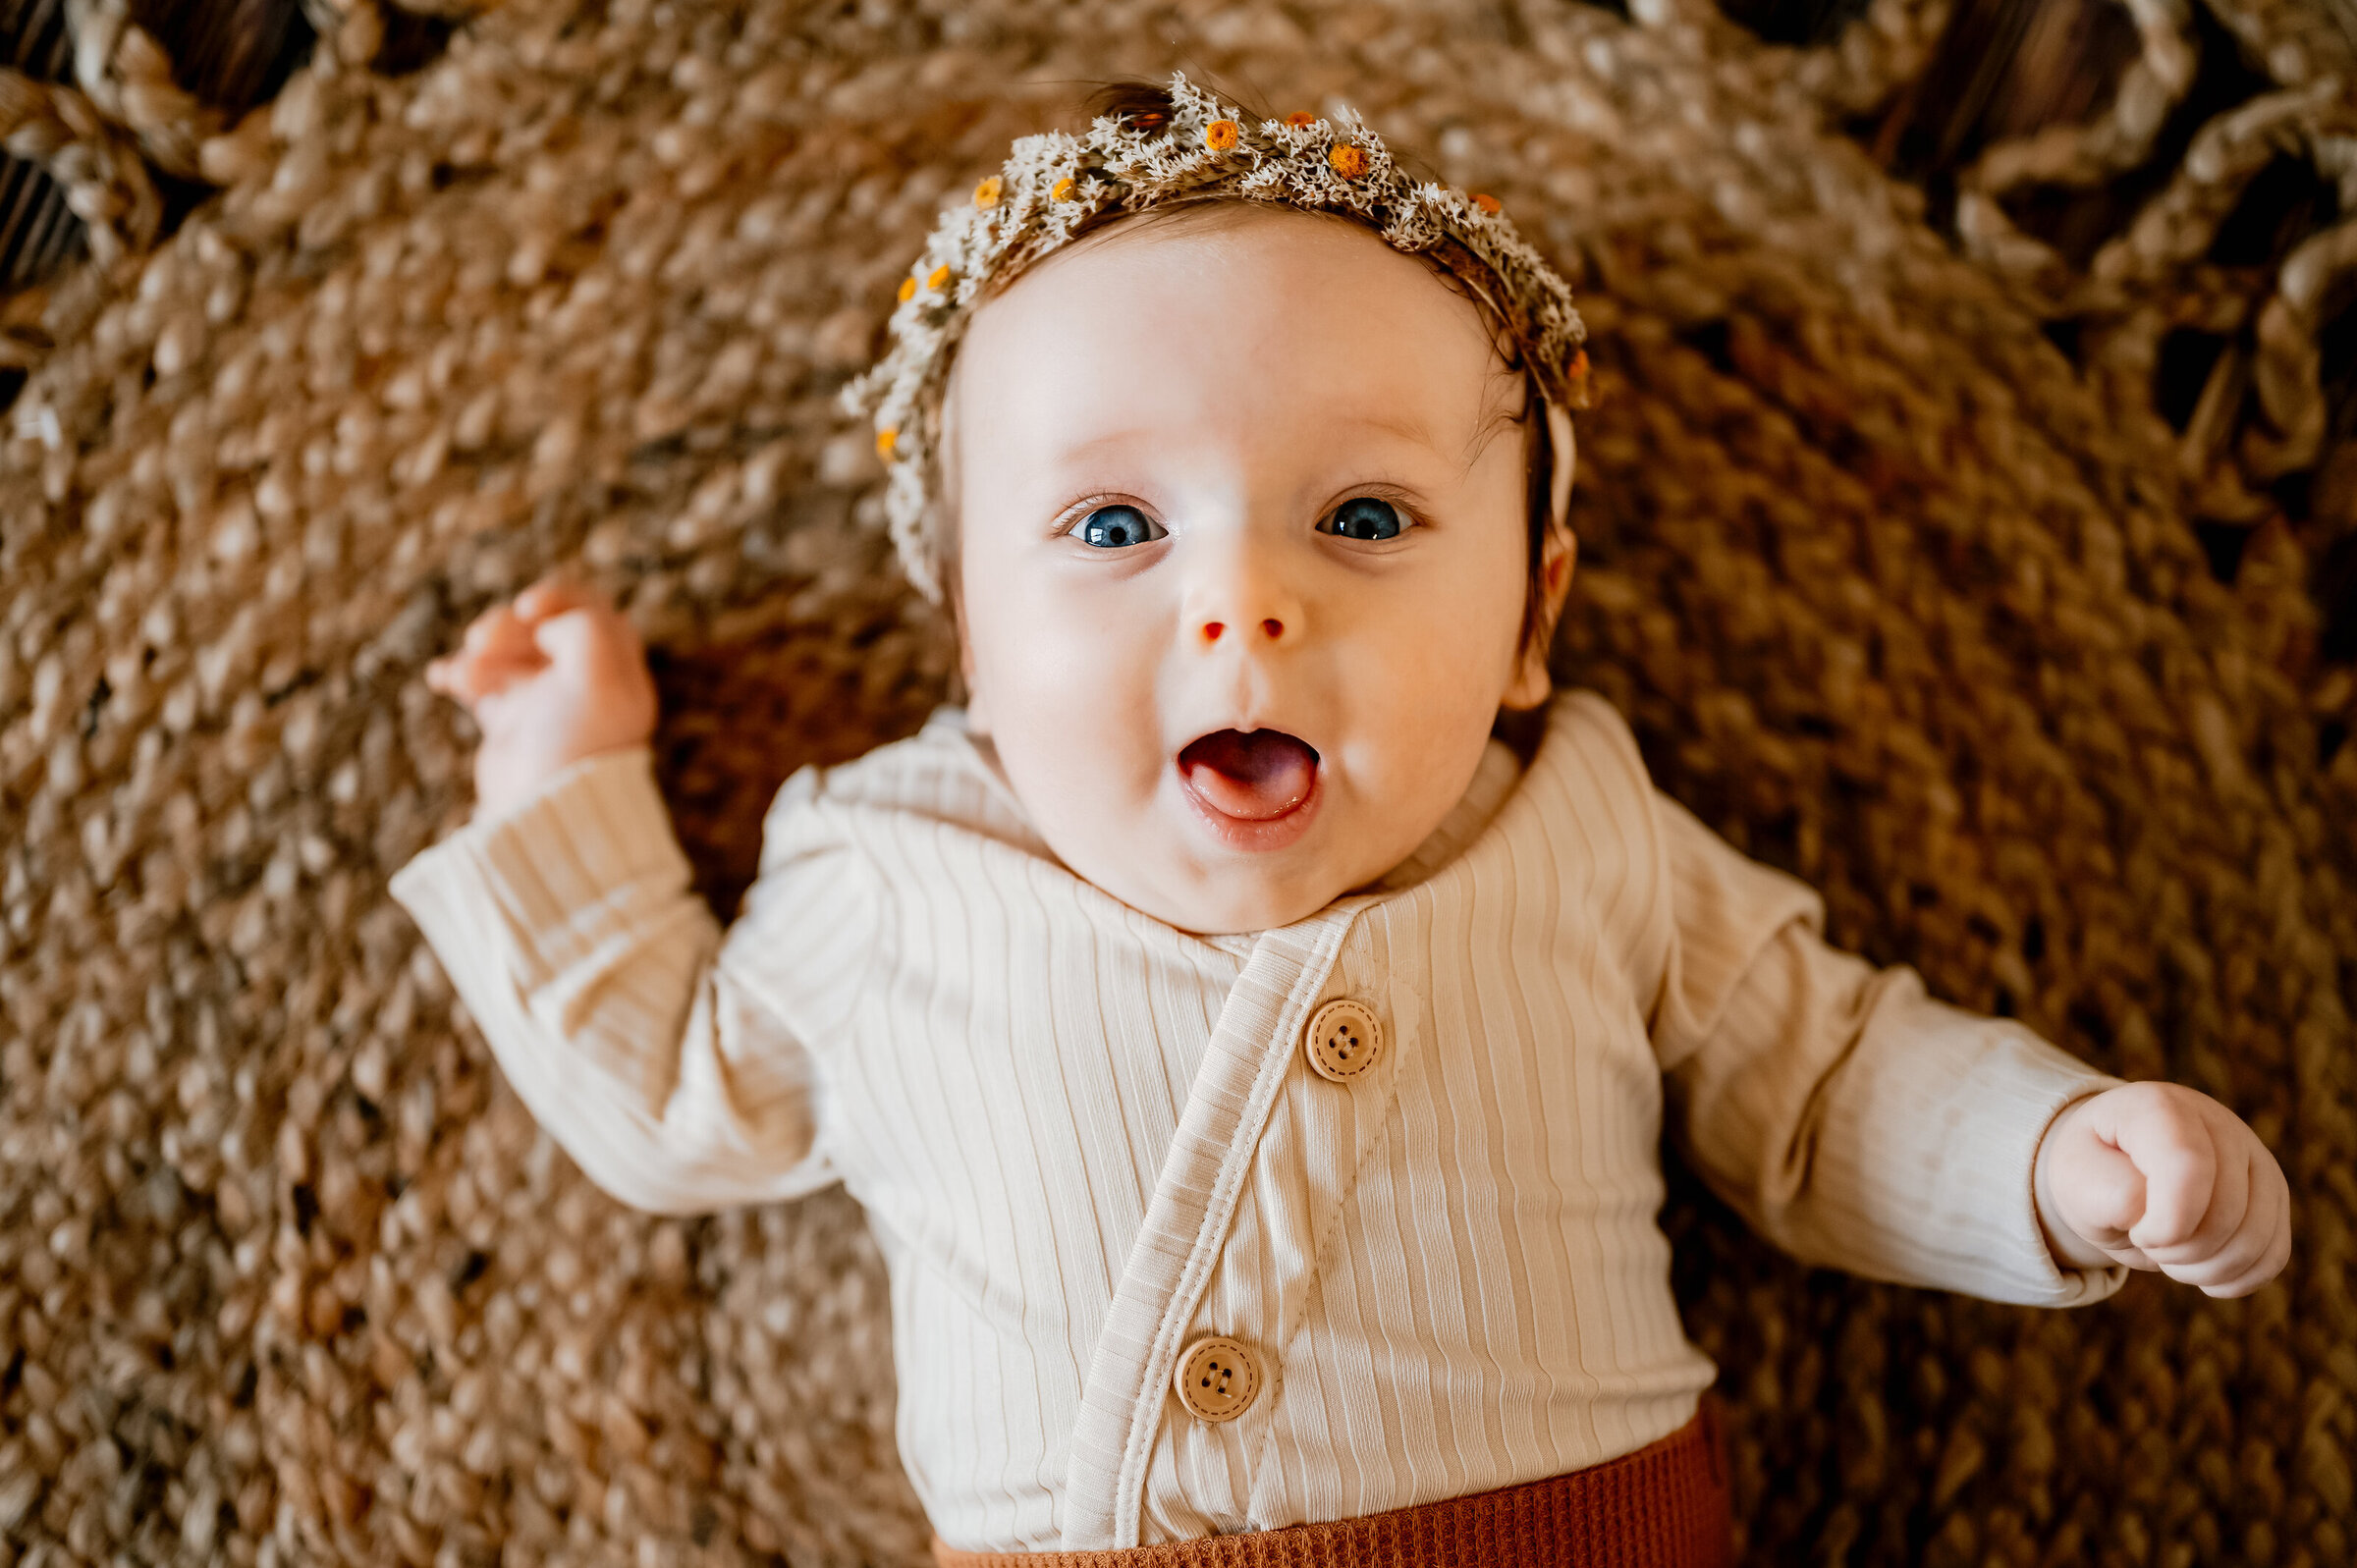 baby lays on boho rug and laughs at camera in dried floral headband